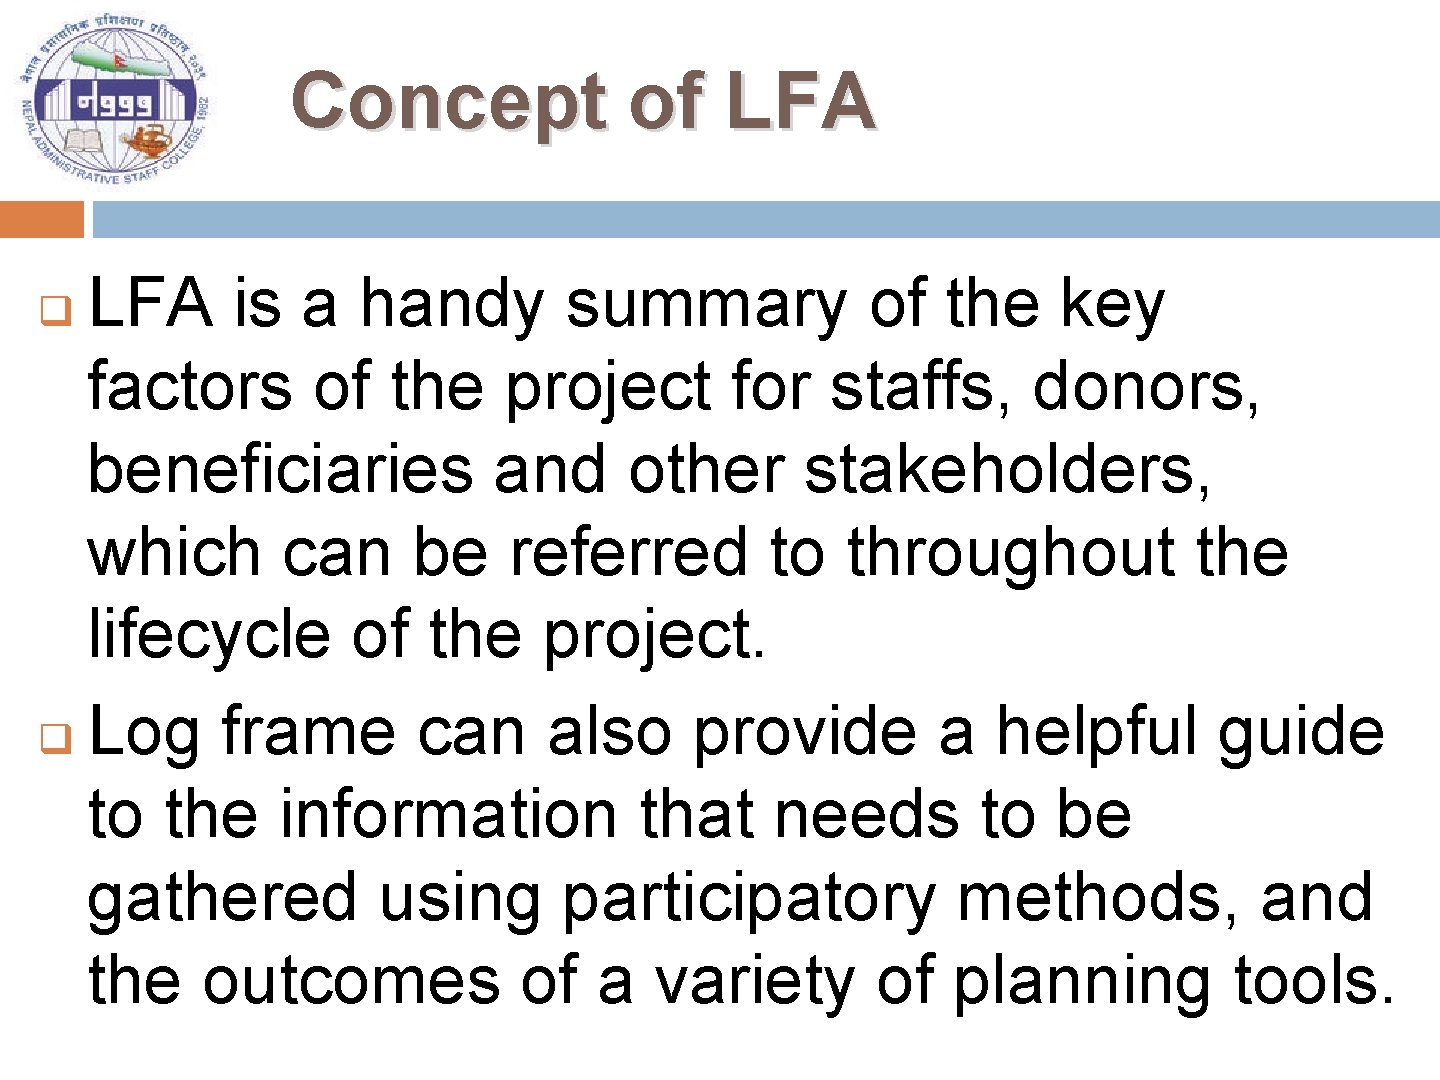 Concept of LFA is a handy summary of the key factors of the project